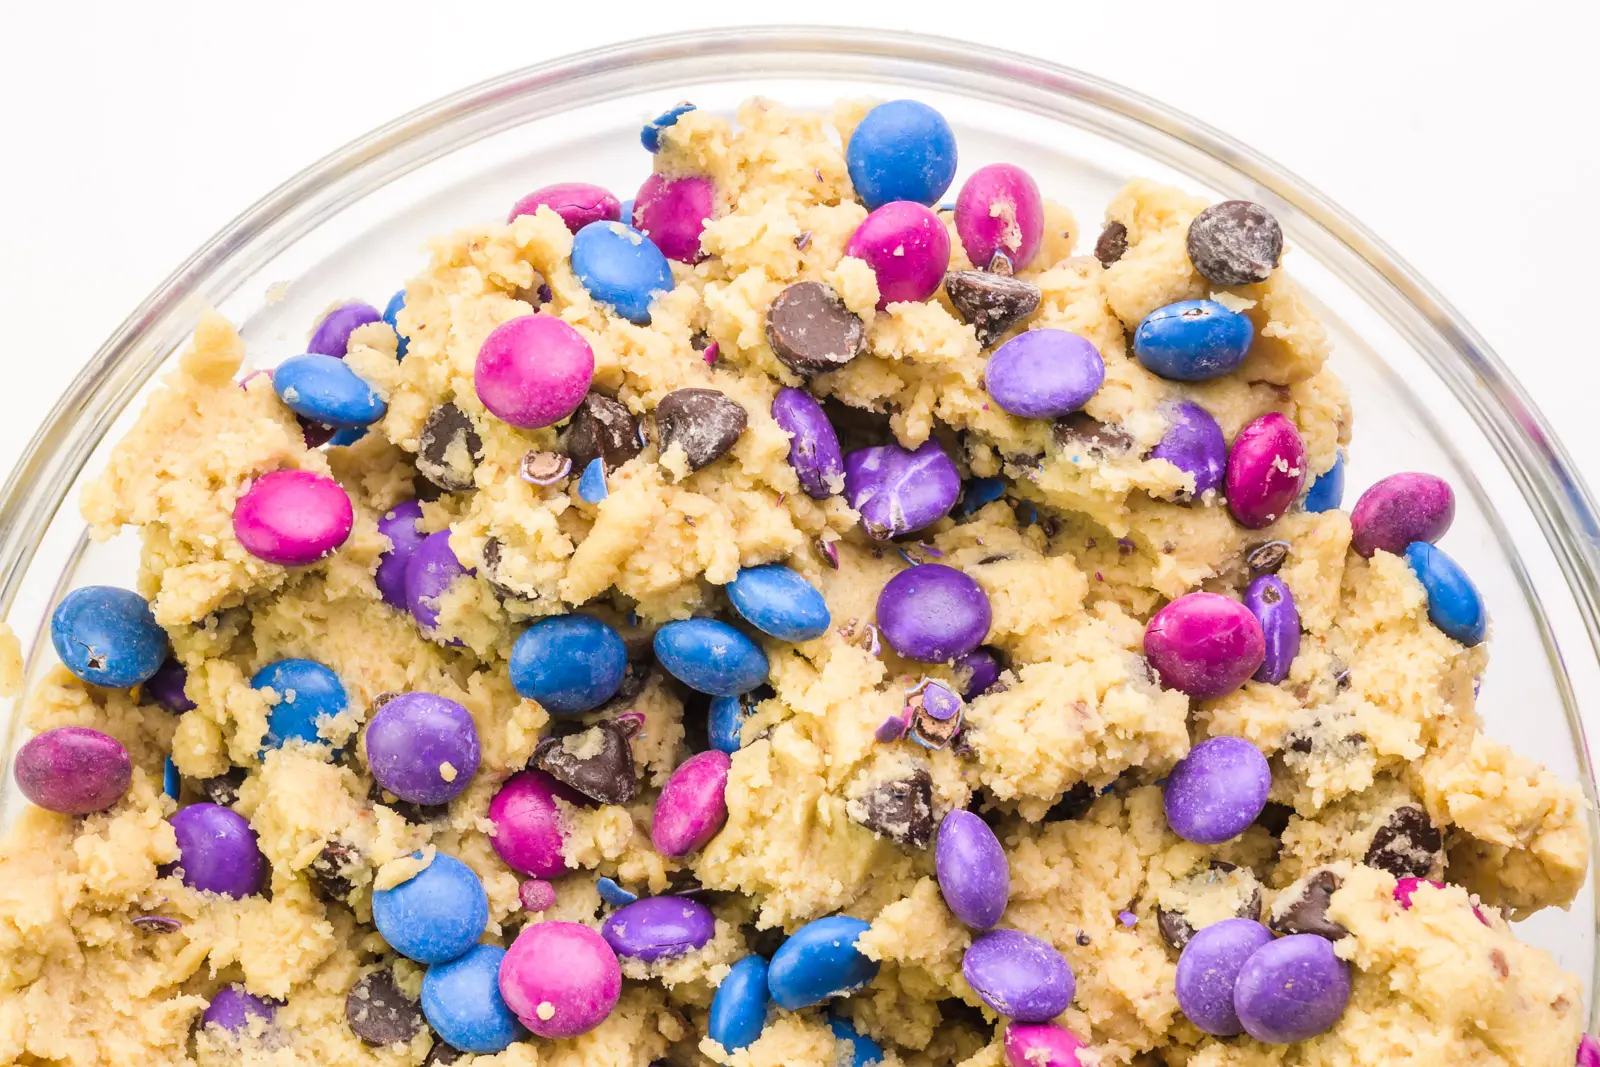 Looking down on a glass bowl full of cookie dough with chocolate chips and colorful candy pieces.